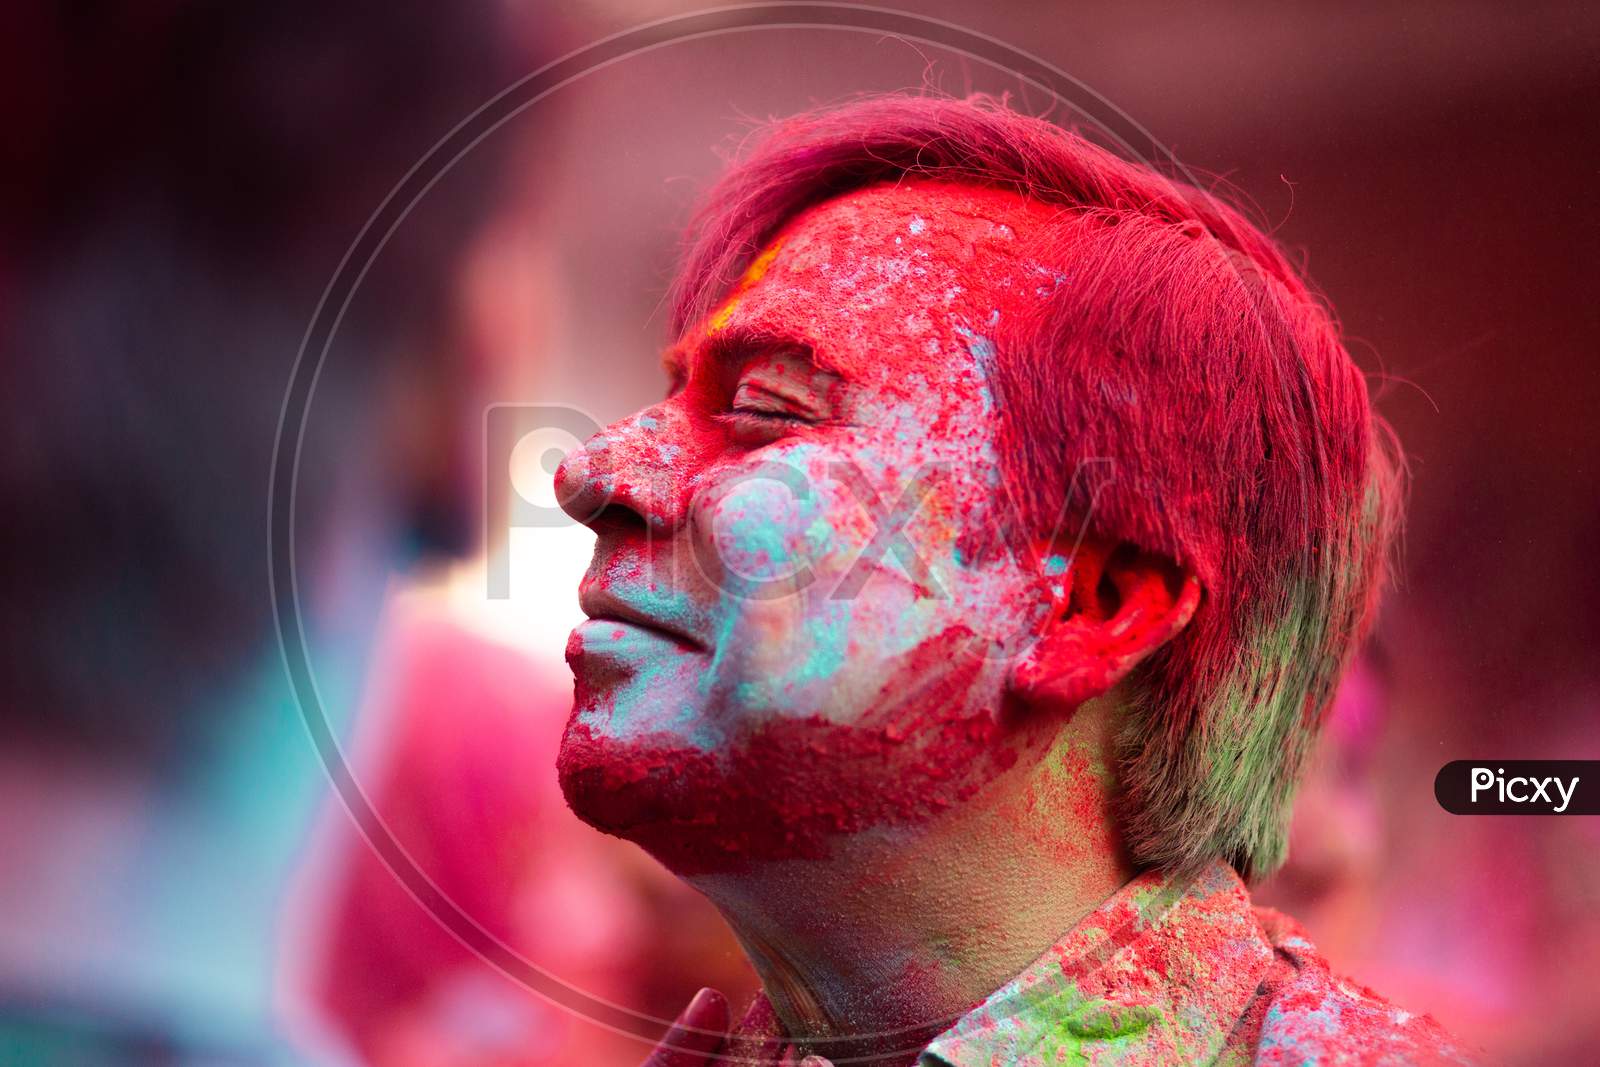 Indian People Filled In Holi Colours During Holi Festival Celebrations